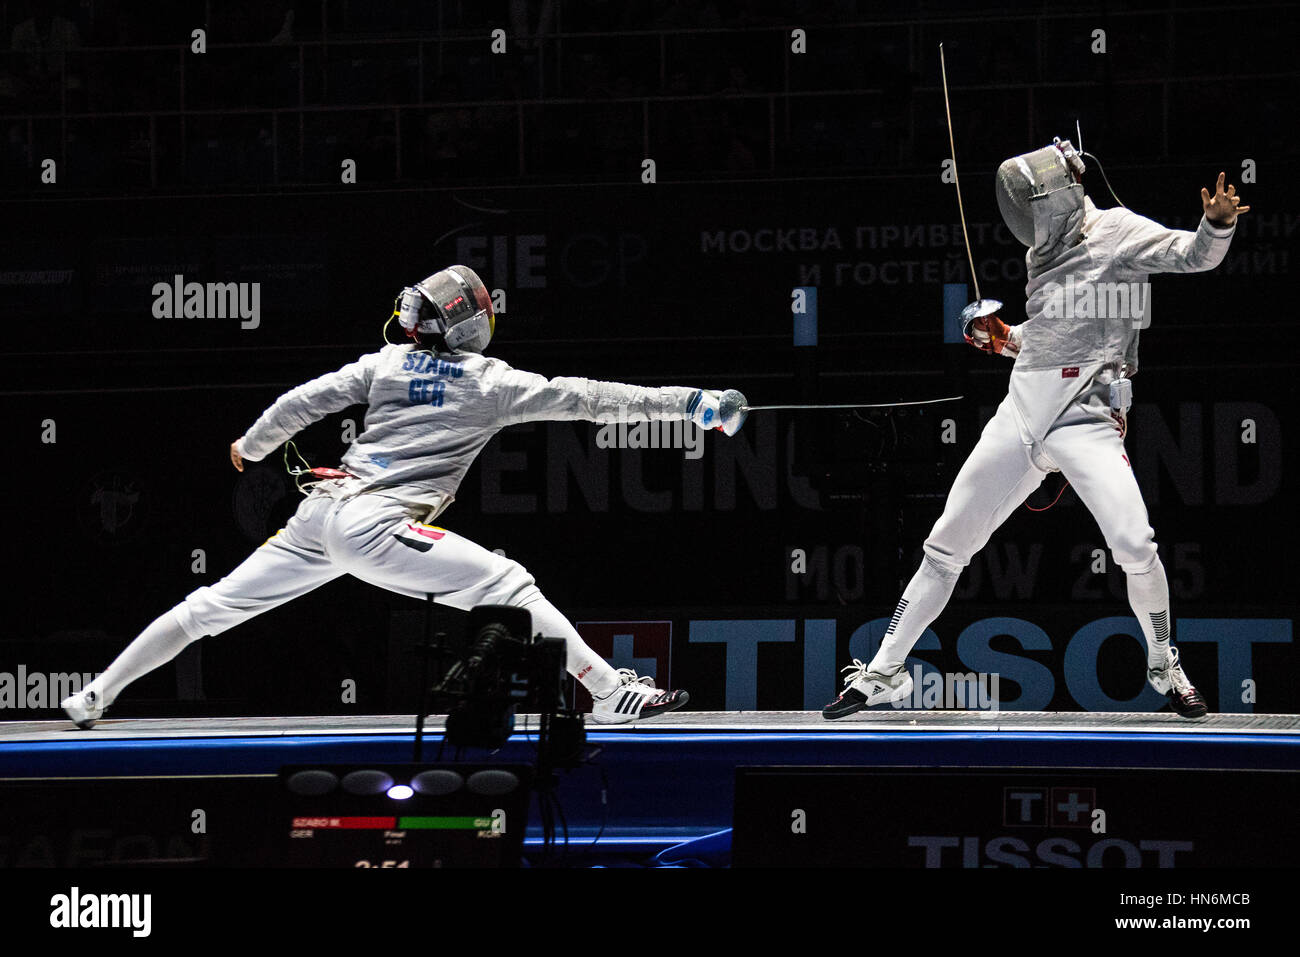 Moscow, Russia - May 30, 2015: Unidentified professional fencers in the finals of the men's individual event at the 2015 Moscow Sabre tournament. Stock Photo